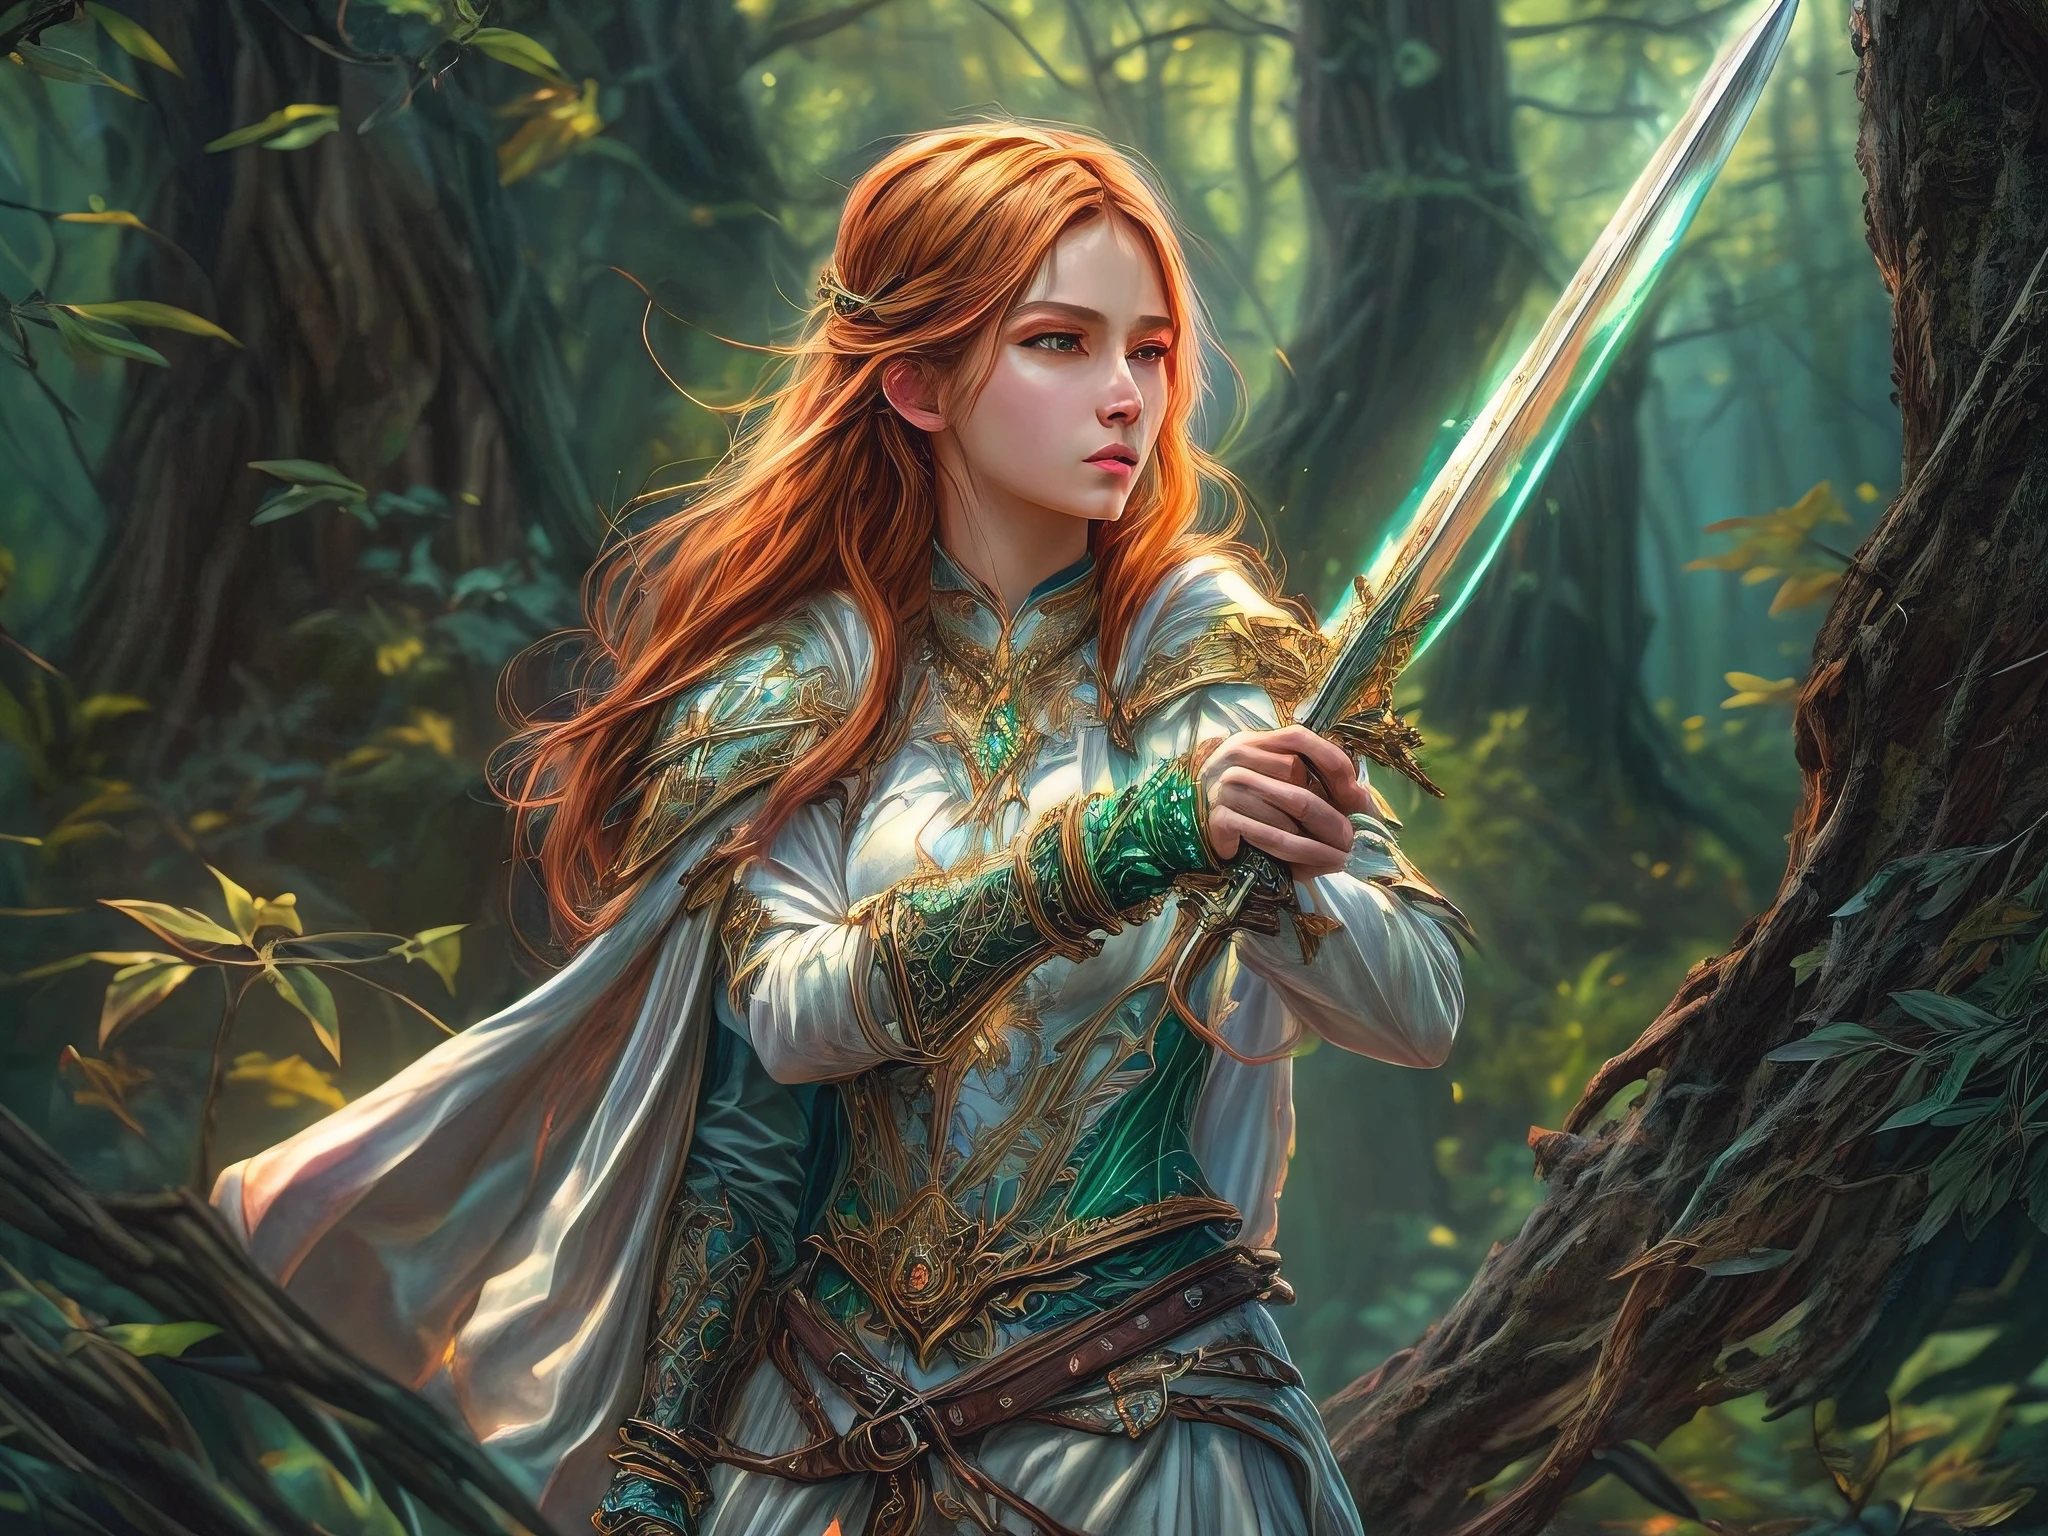 a picture of woman paladin of nature protecting the forest, controlling magical plants, tanjoreai, a woman holy knight, protector of nature, red hair, long hair, full body (best details, Masterpiece, best quality :1.5), ultra detailed face (best details, Masterpiece, best quality :1.5), ultra feminine (best details, Masterpiece, best quality :1.5), red hair, long hair, braided hair, pale skin, blue eyes, intense eyes, wearying heavy armor, white armor (best details, Masterpiece, best quality :1.5), green cloak, flowing cloak, armed with a sword, glowing sword fantasysword sword, fantasy forest background, D&D art, RPG art, magical atmosphere magic-fantasy-forest, ultra best realistic, best details, best quality, 16k, [ultra detailed], masterpiece, best quality, (extremely detailed), ultra wide shot, photorealism, depth of field, hyper realistic painting, 3D rendering